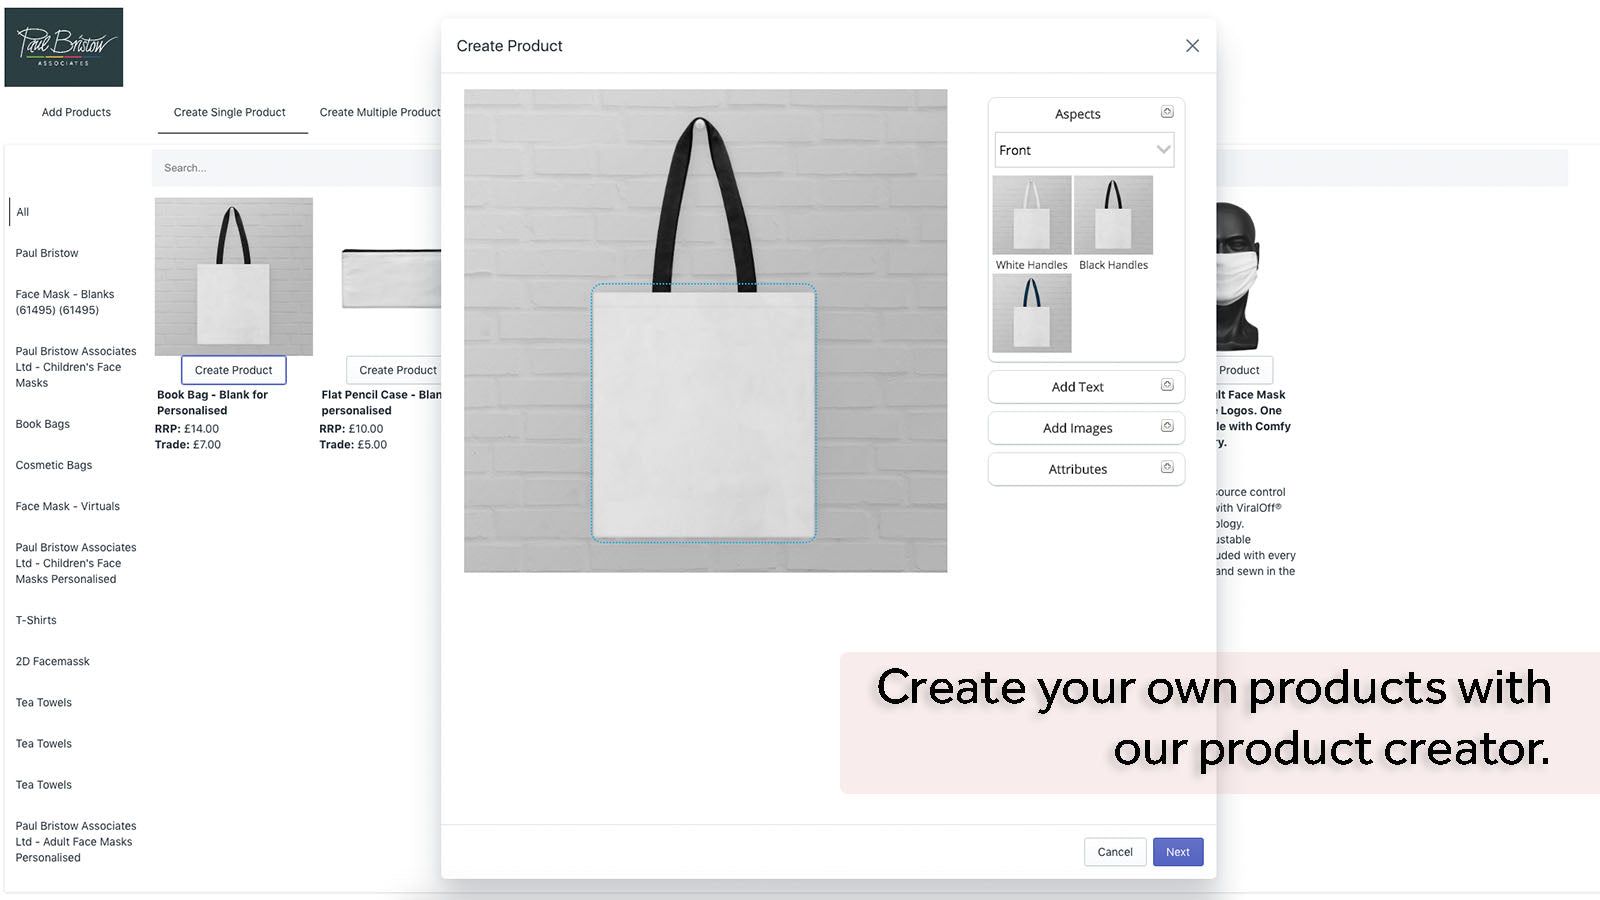 Create your own products with our product creator.